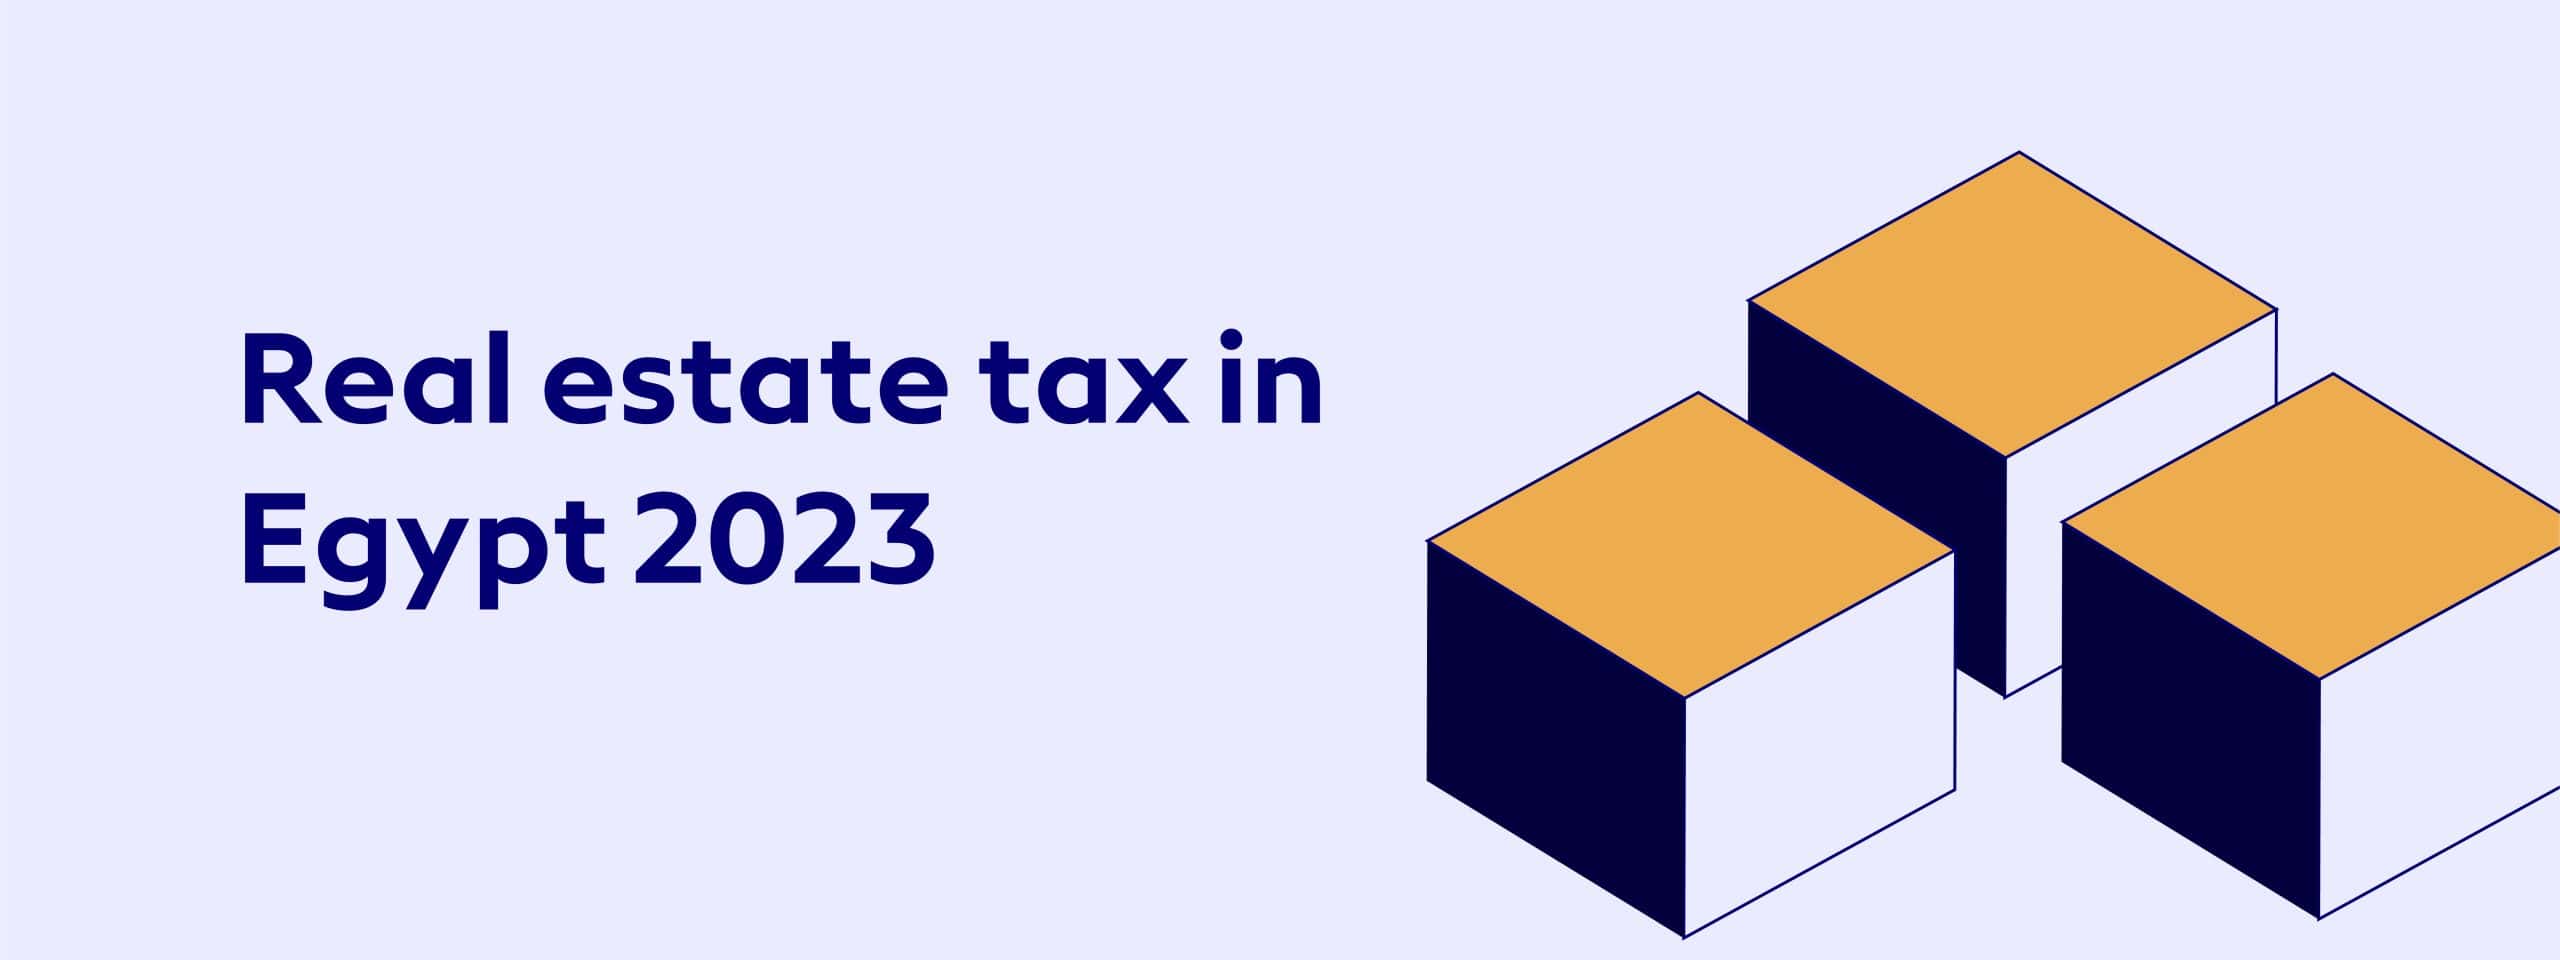 Real estate tax in Egypt 2023